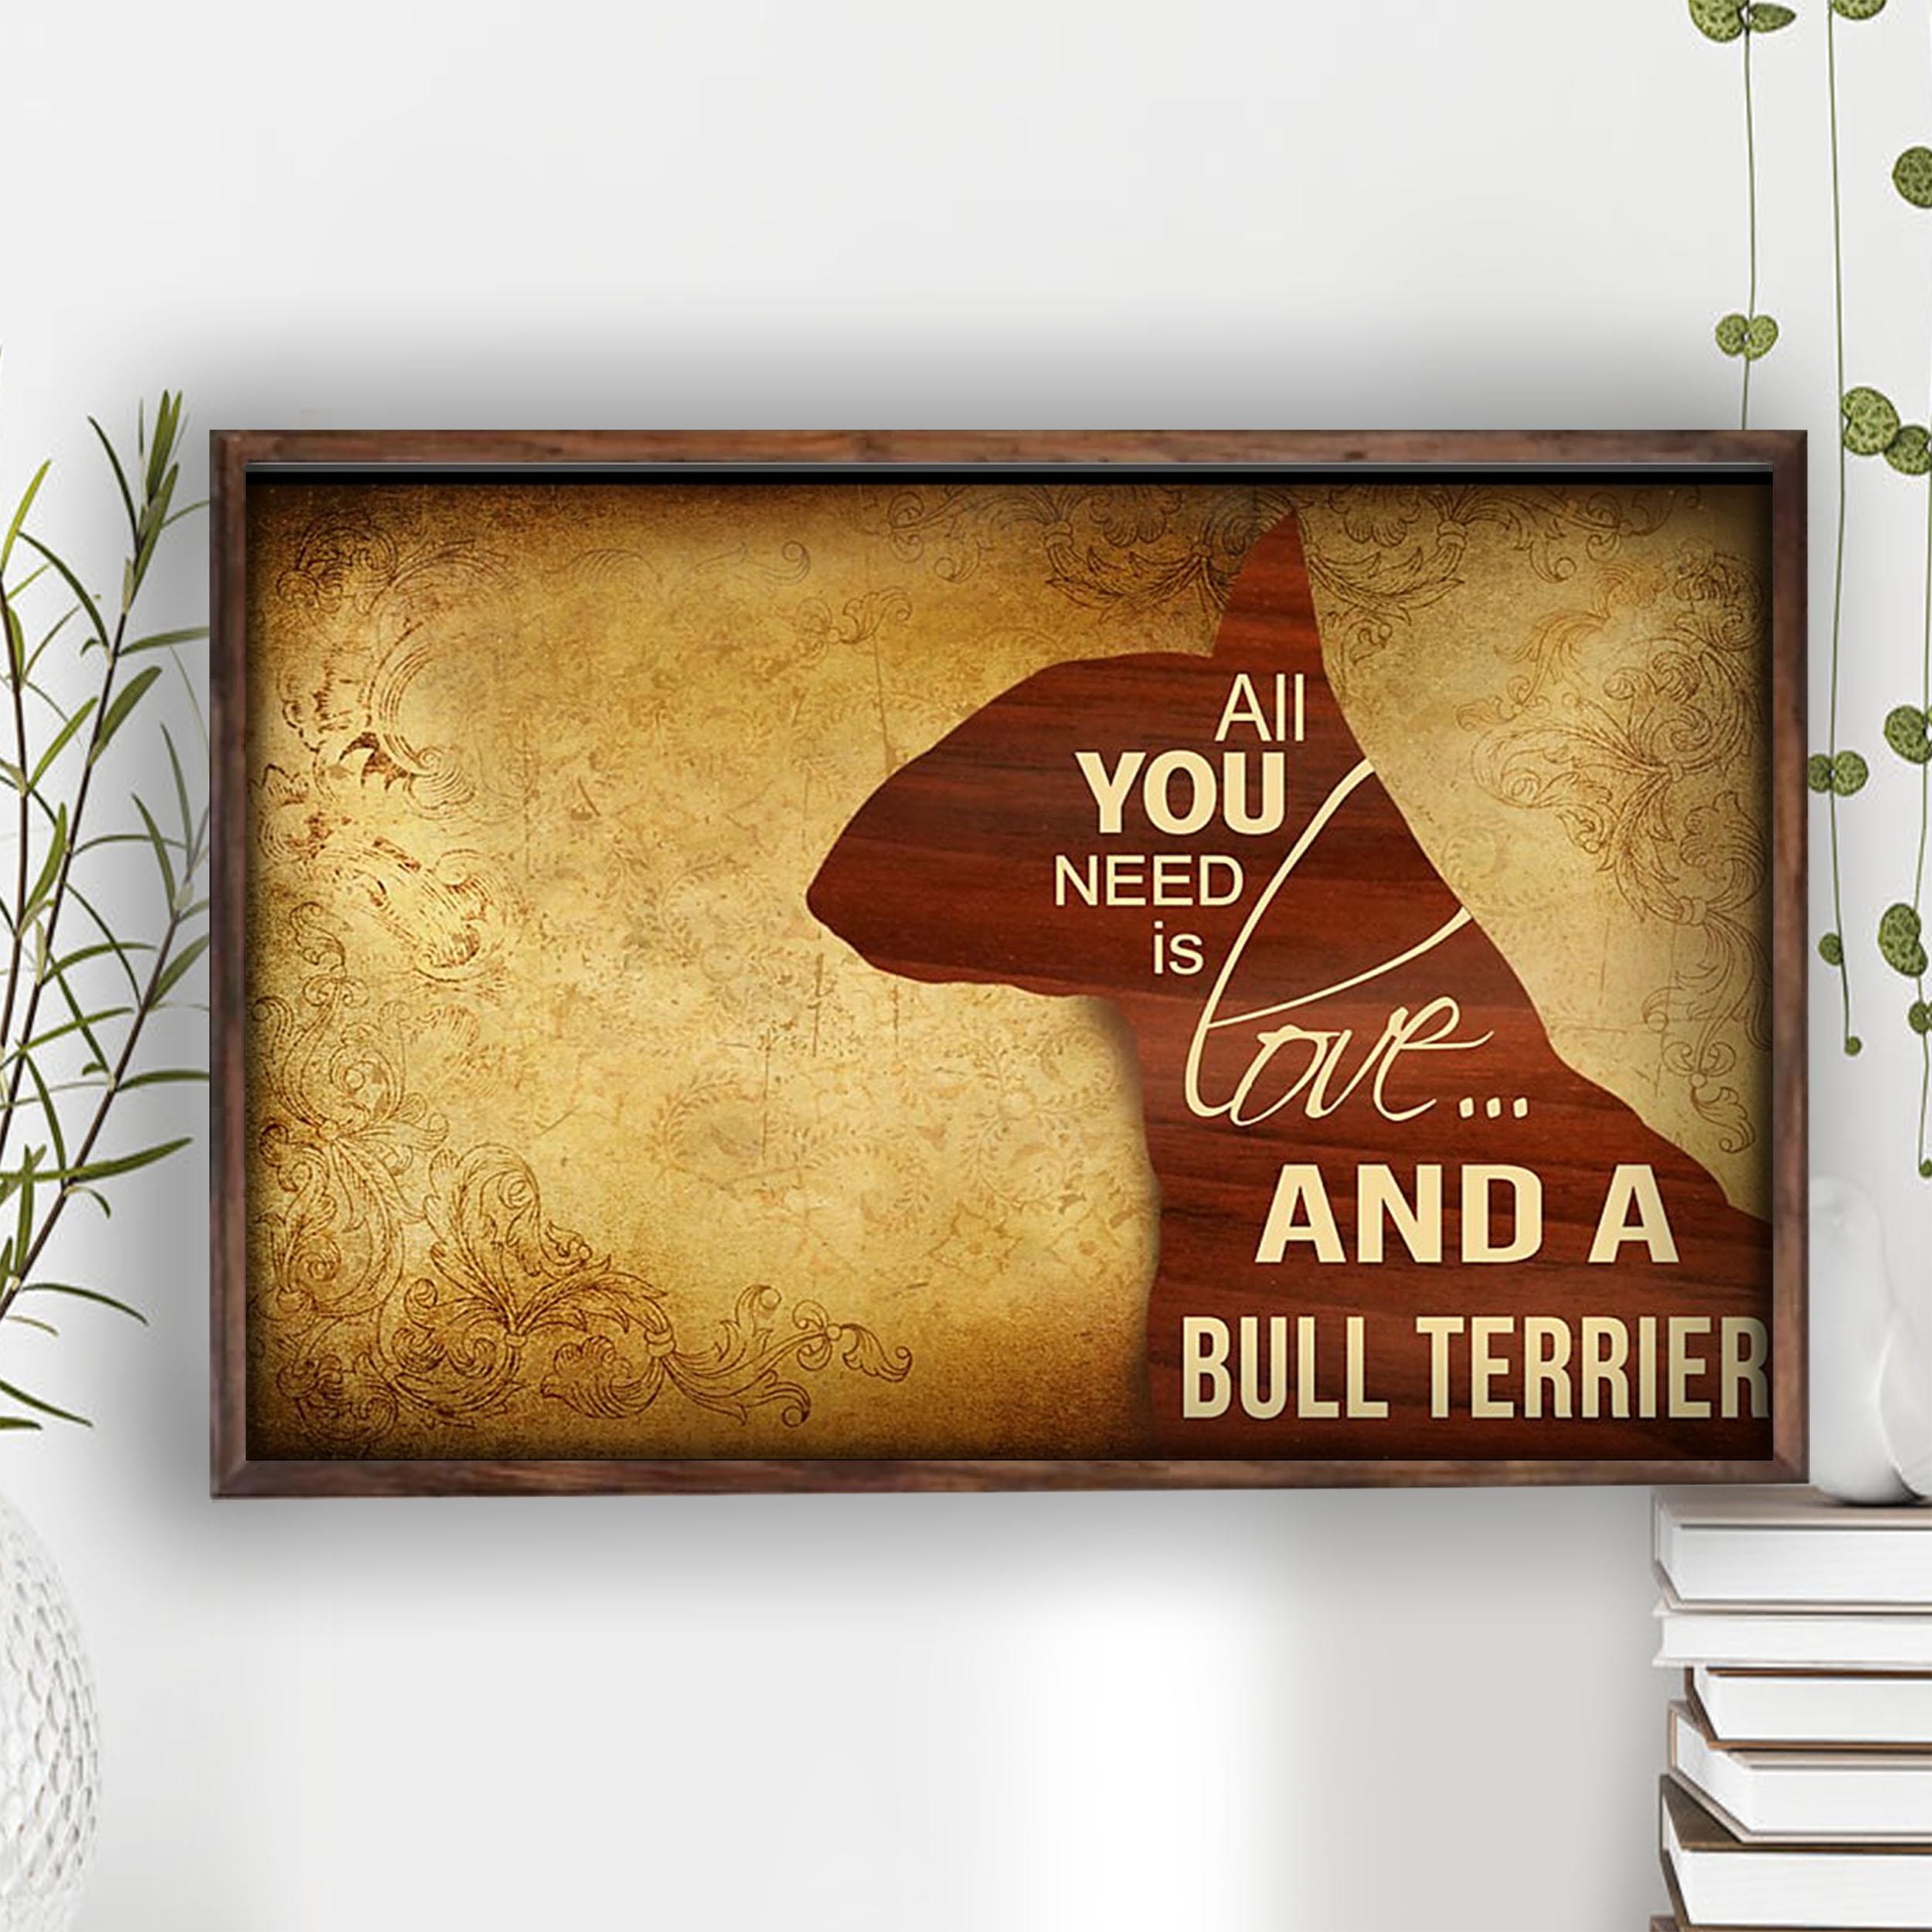 Bull Terrier Poster Bull Terrier Lovers All You Need Is Love Wall Art Home Decor Poster Print